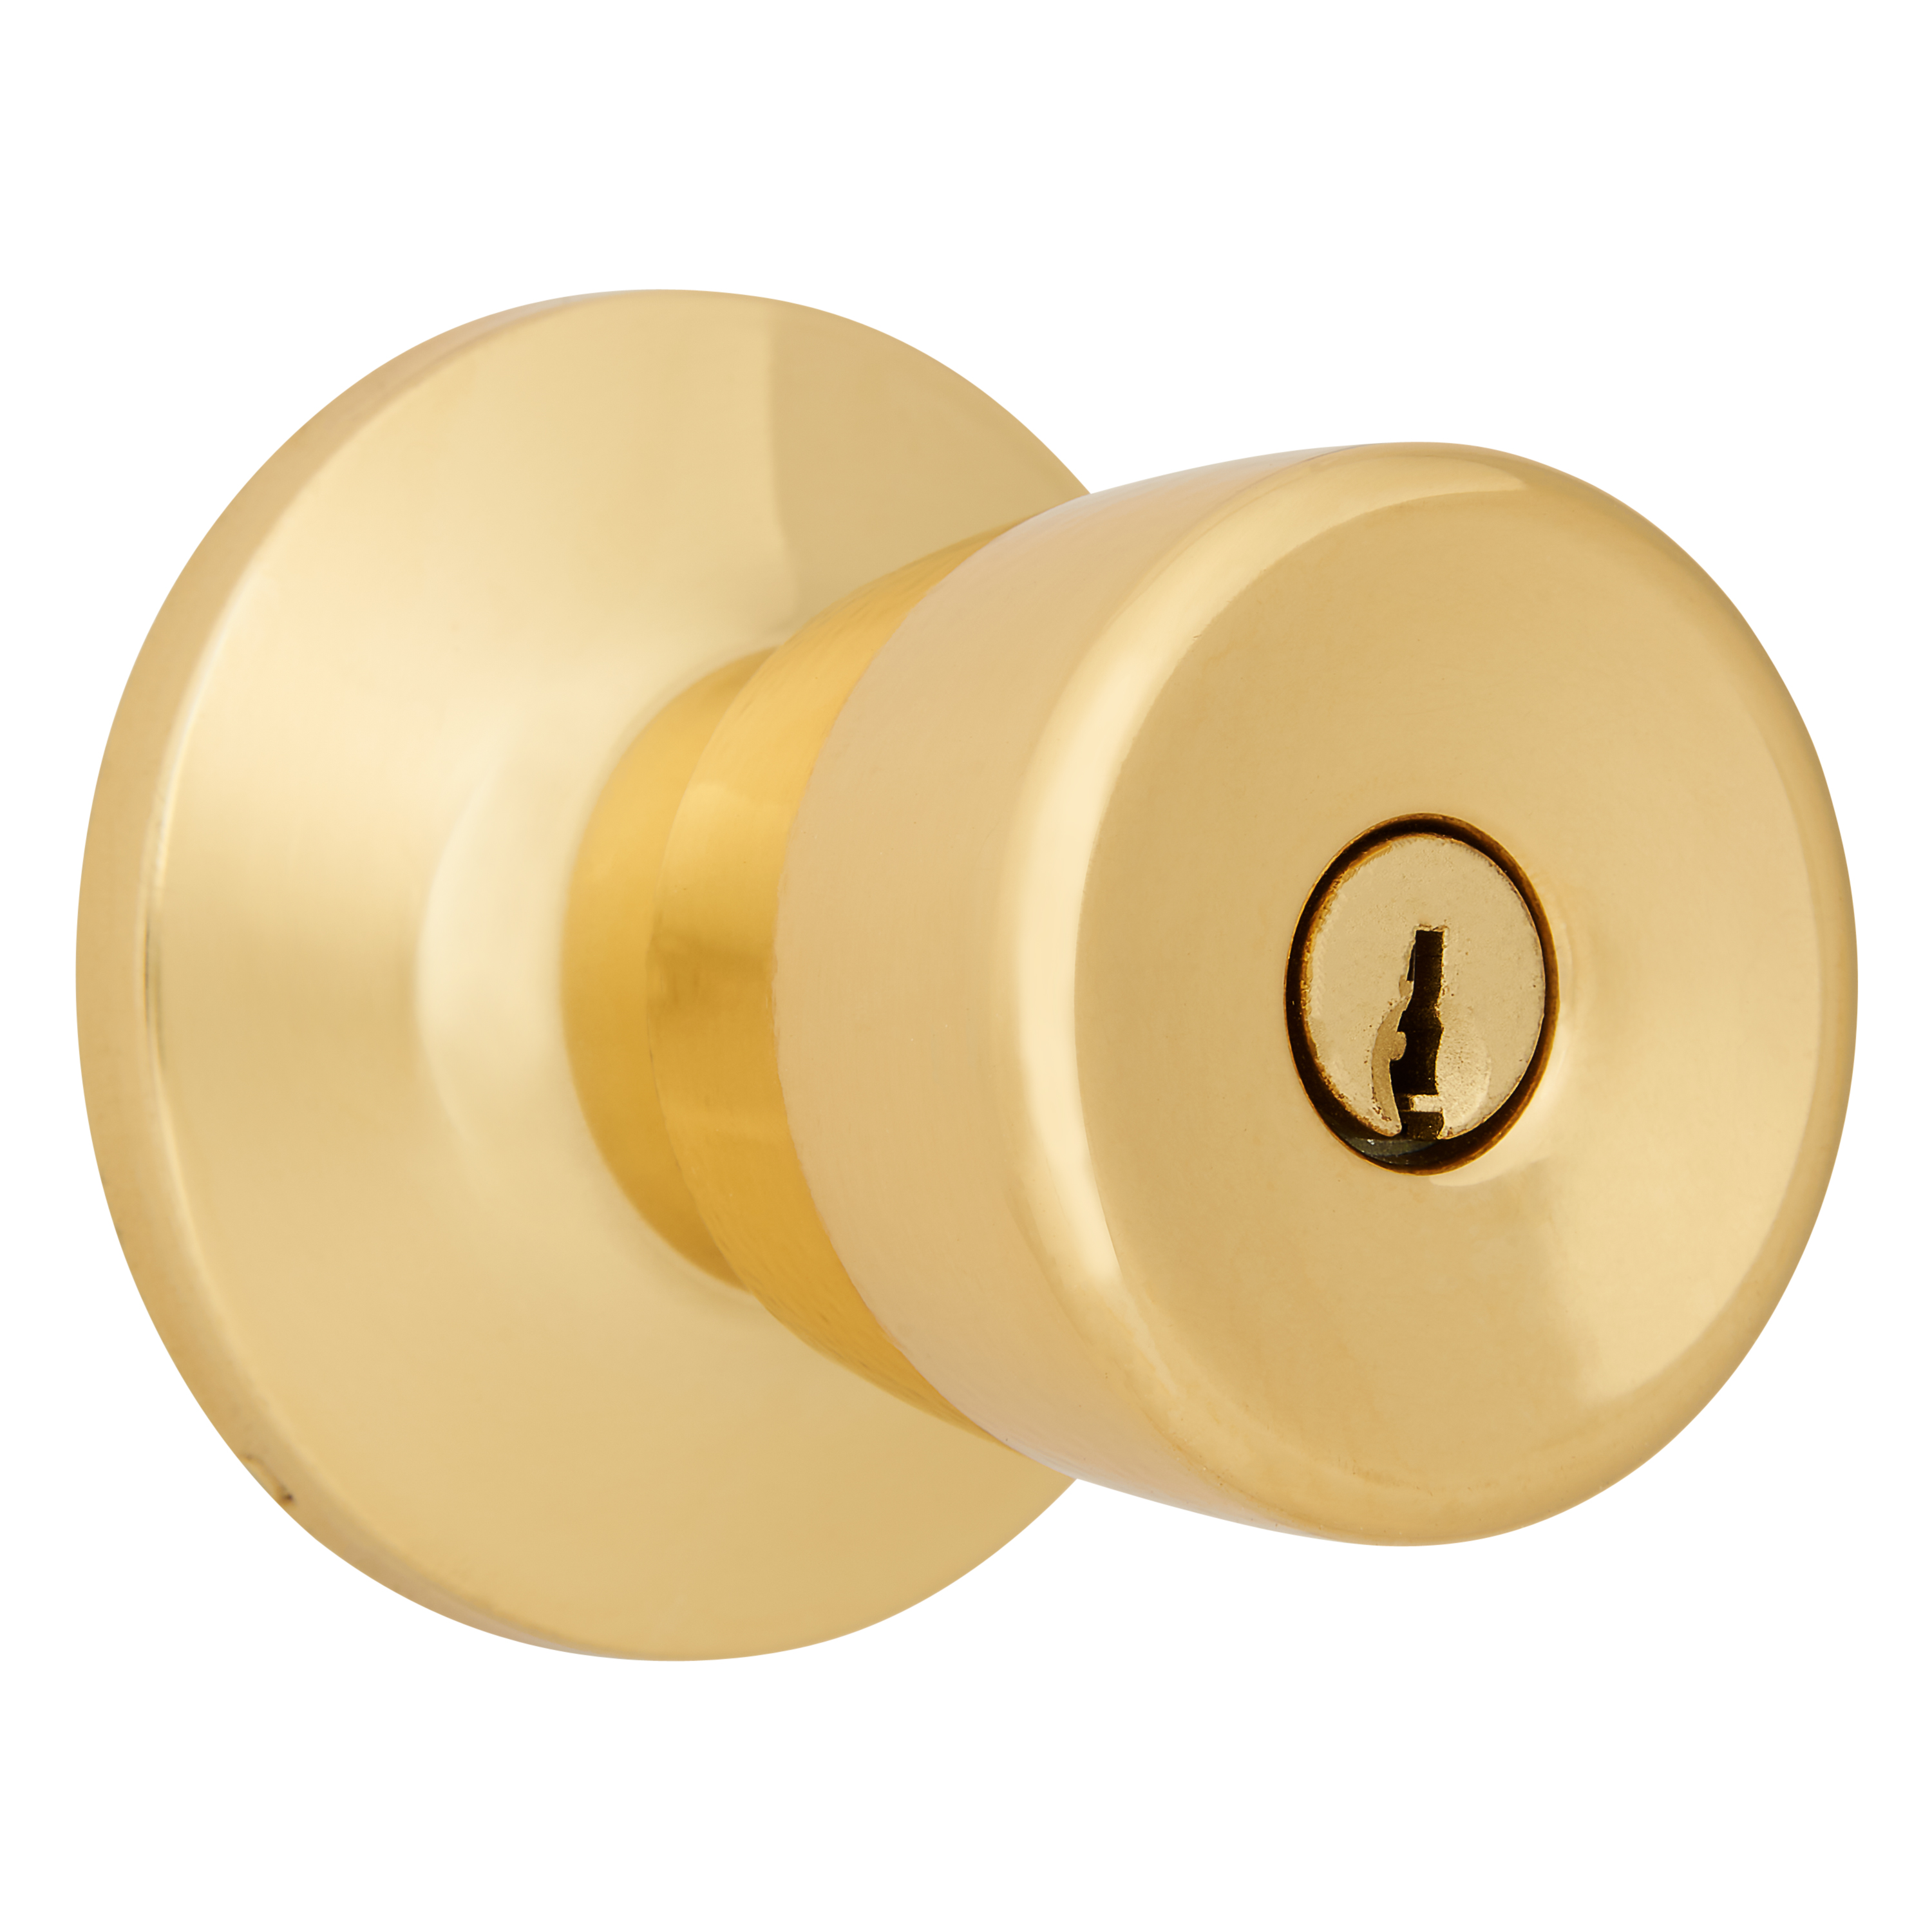 Brinks Keyed Entry Mobile Home Bell Style Doorknob, Polished Brass Finish - image 3 of 11